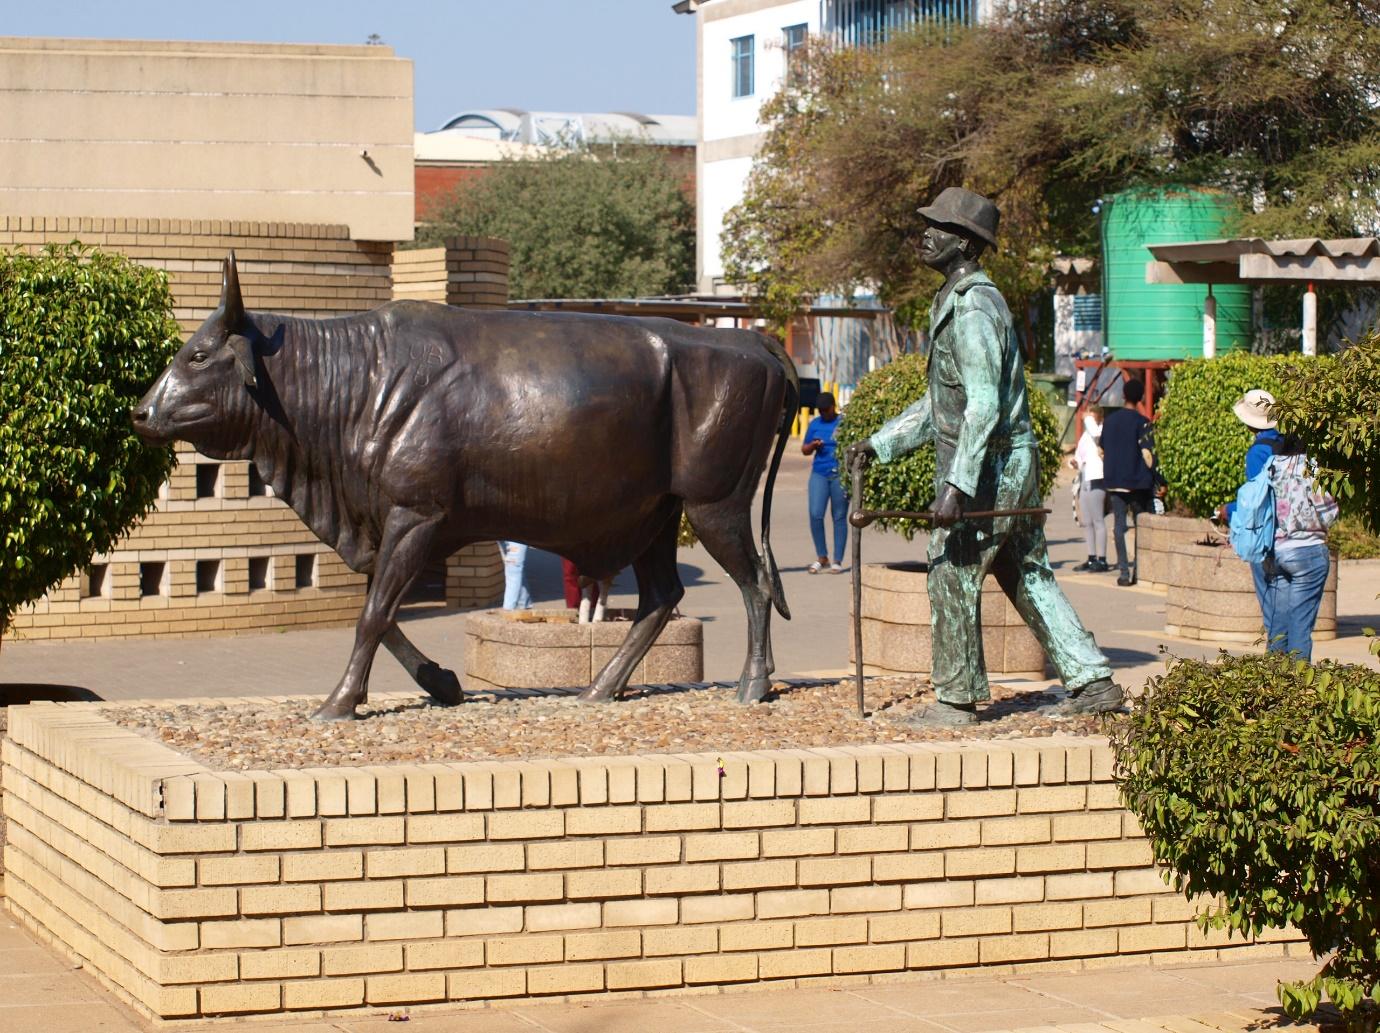 A statue of a person and a bull

Description automatically generated with low confidence